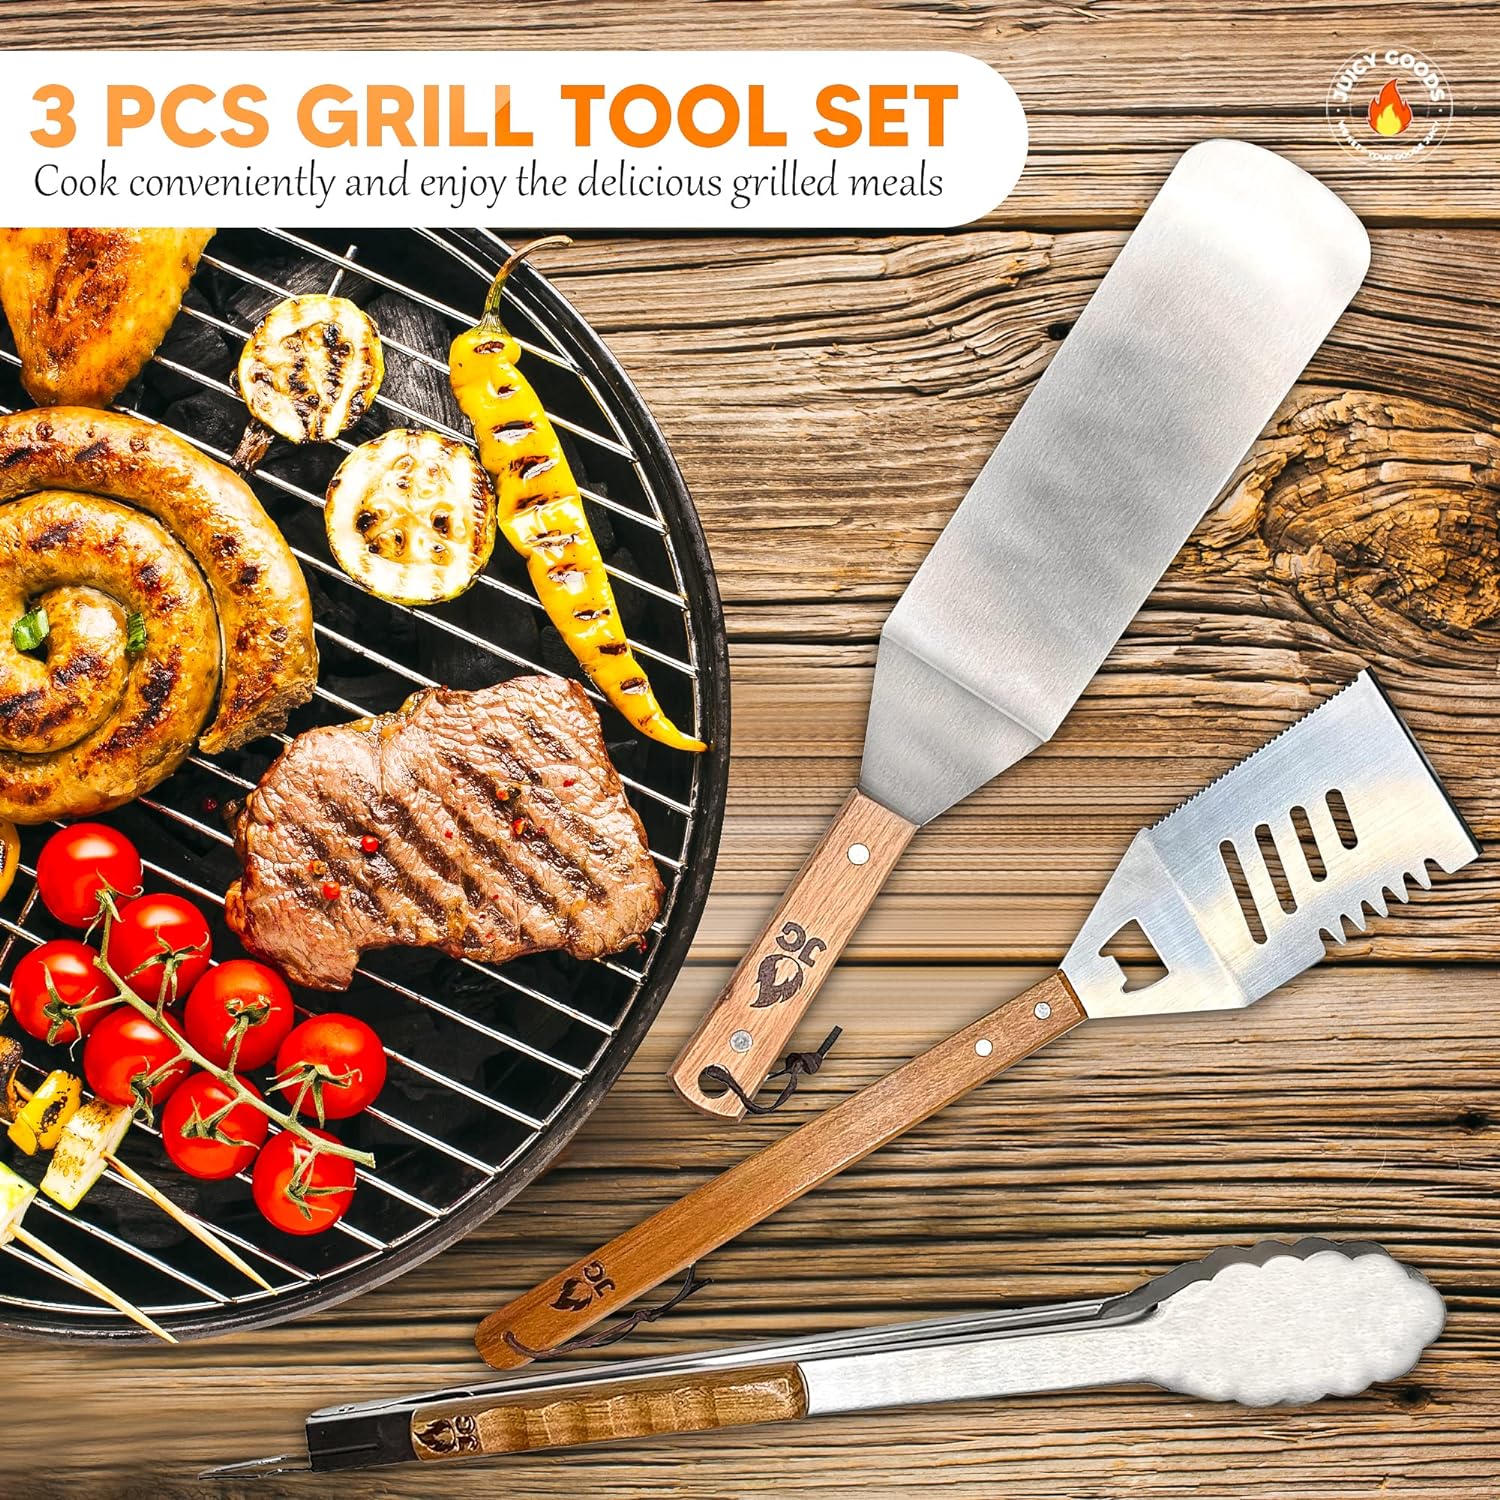 BBQ Grill Set Heavy Duty Tool Set - BBQ Tool Set 3 pc Grill Accessories with Stainless Steel Spatula Tongs and BBQ Spatula and Wood Handles Dark Acacia